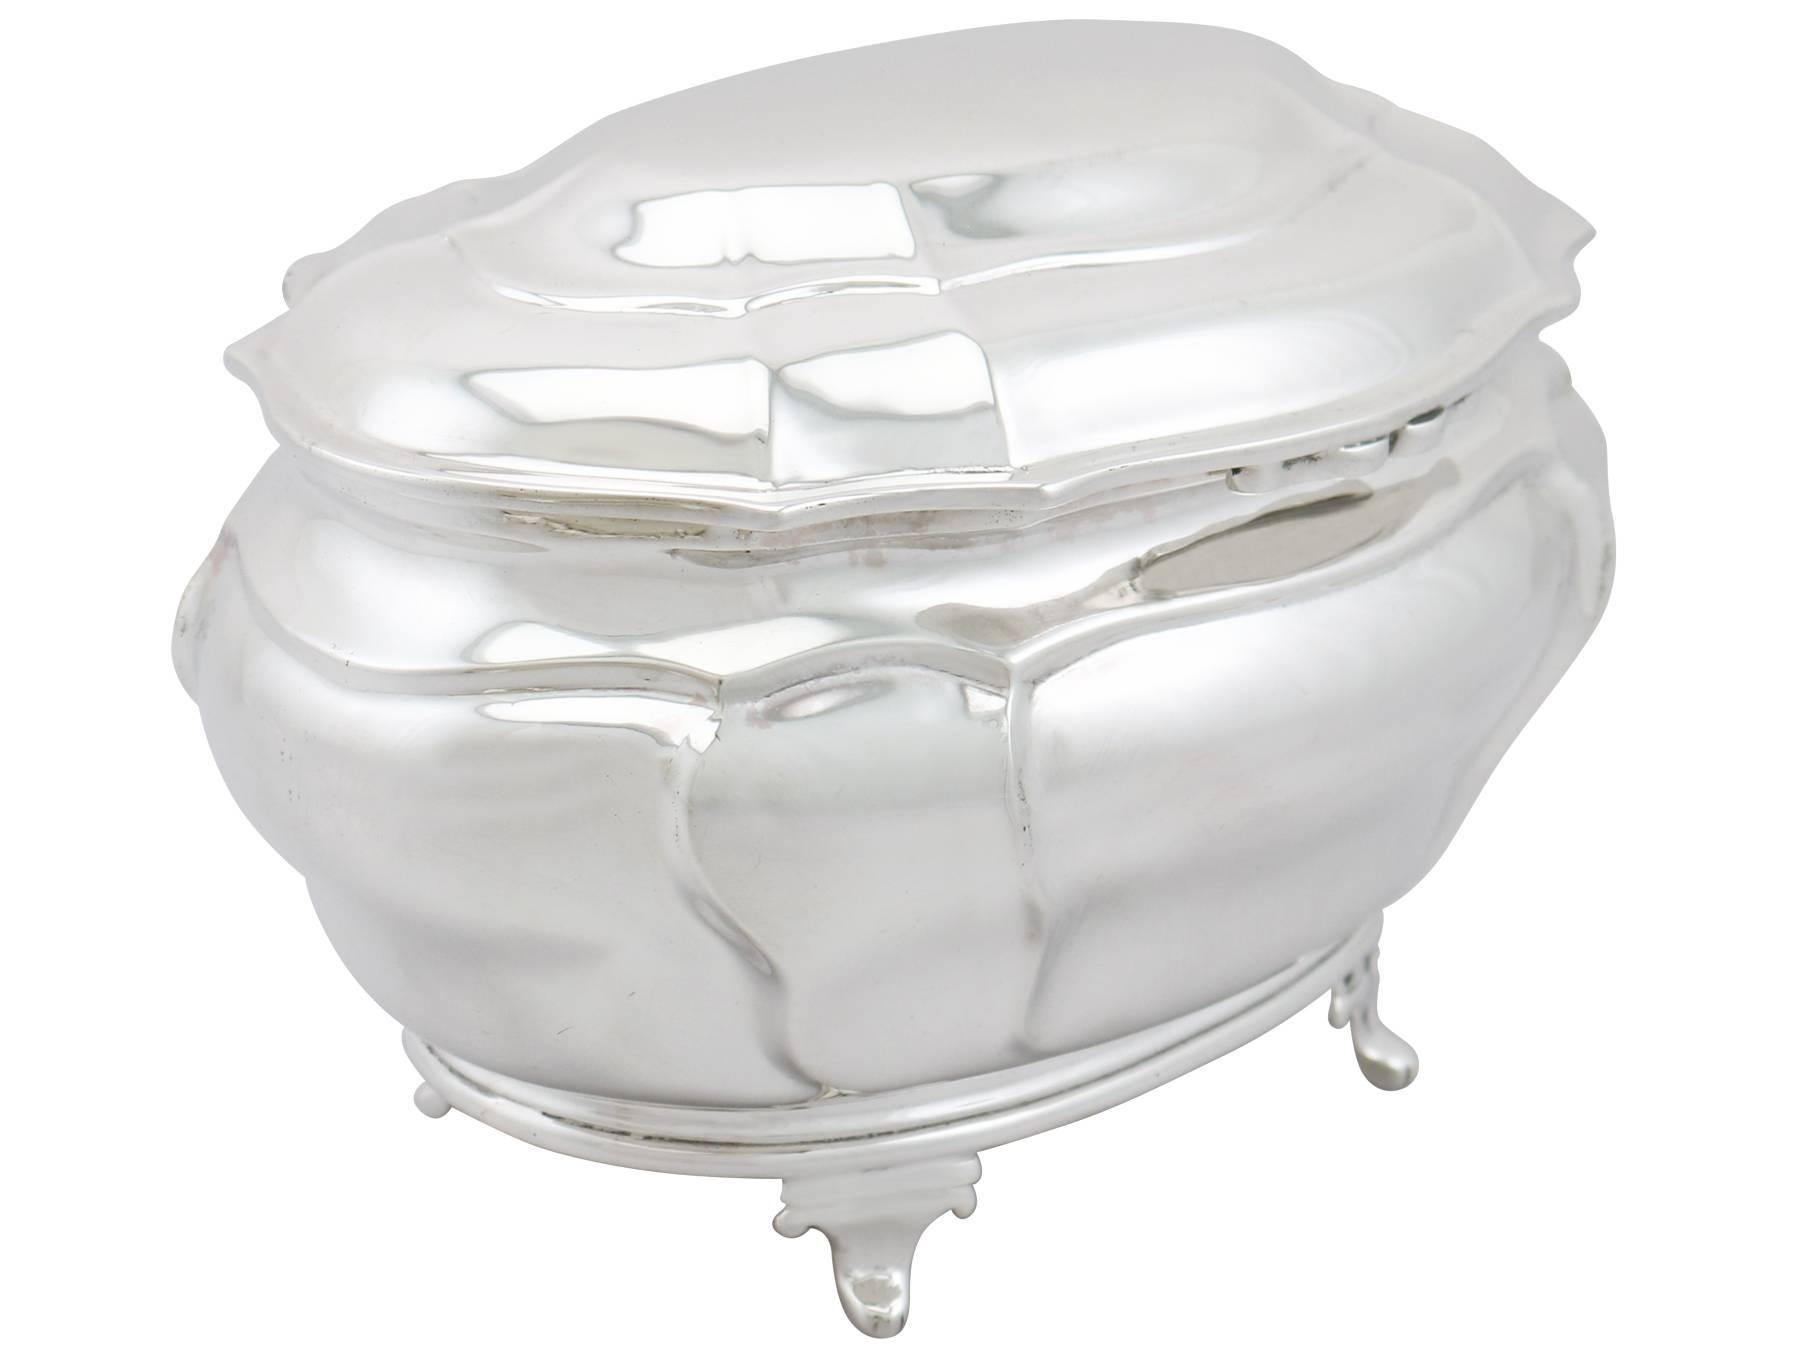 An exceptional, fine and impressive antique Victorian English sterling silver biscuit box, made by Charles Stuart Harris; an addition to our silver teaware collection

This exceptional antique sterling silver biscuit box has an oval shaped,